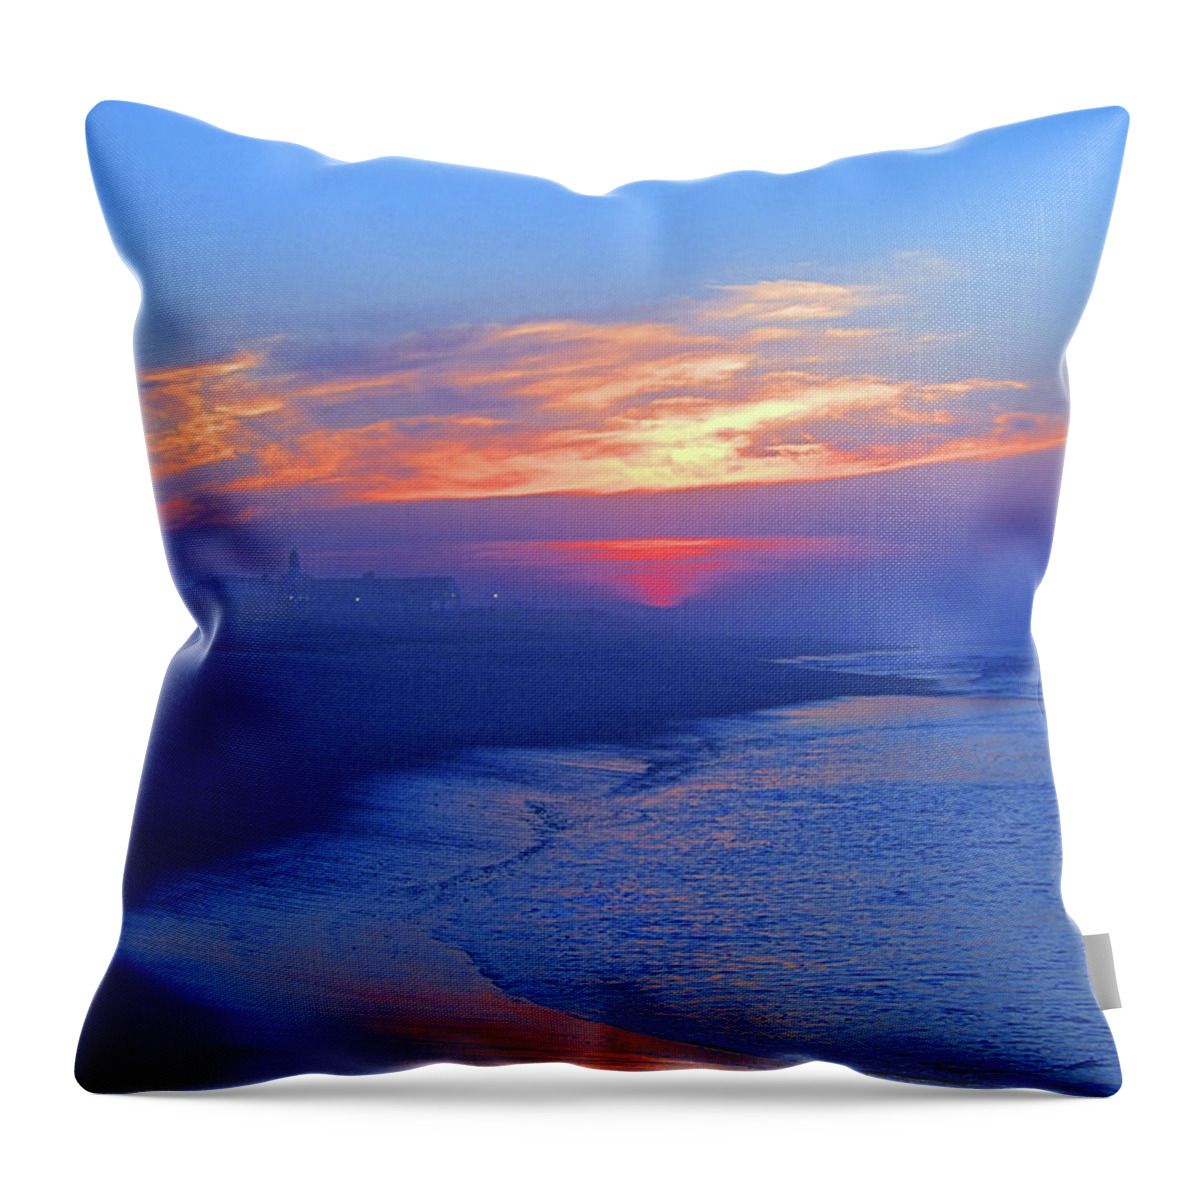 Seas Throw Pillow featuring the photograph Pre Dawn I I by Newwwman